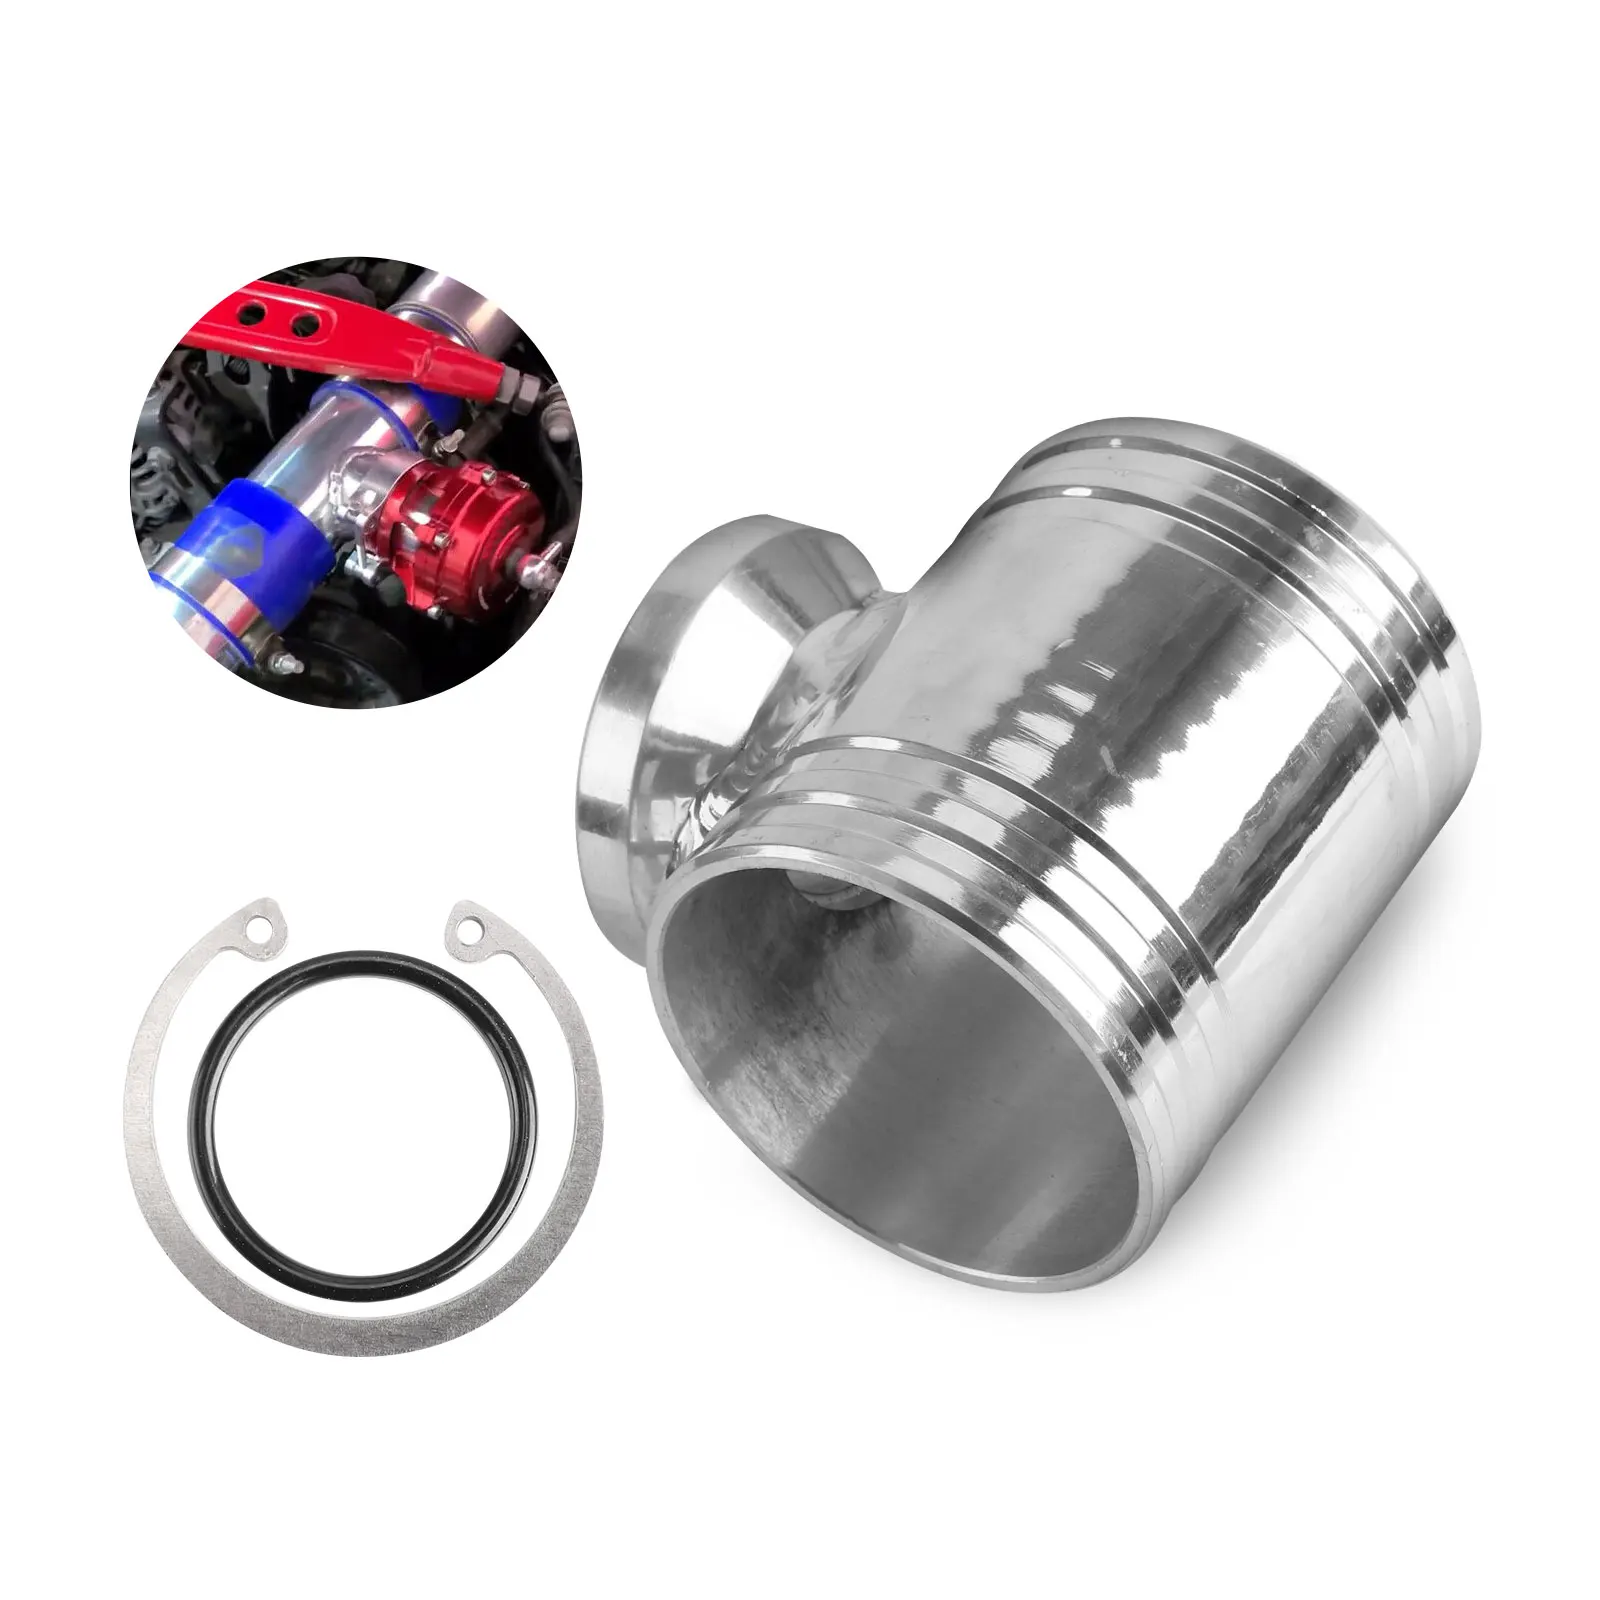 

76Mm Universal Off Valve Tube Turbo 3" Aluminum Flange Pipe Tube Ssqv Sqv Bov Blow Off Valve with C Clip & Seal Ring